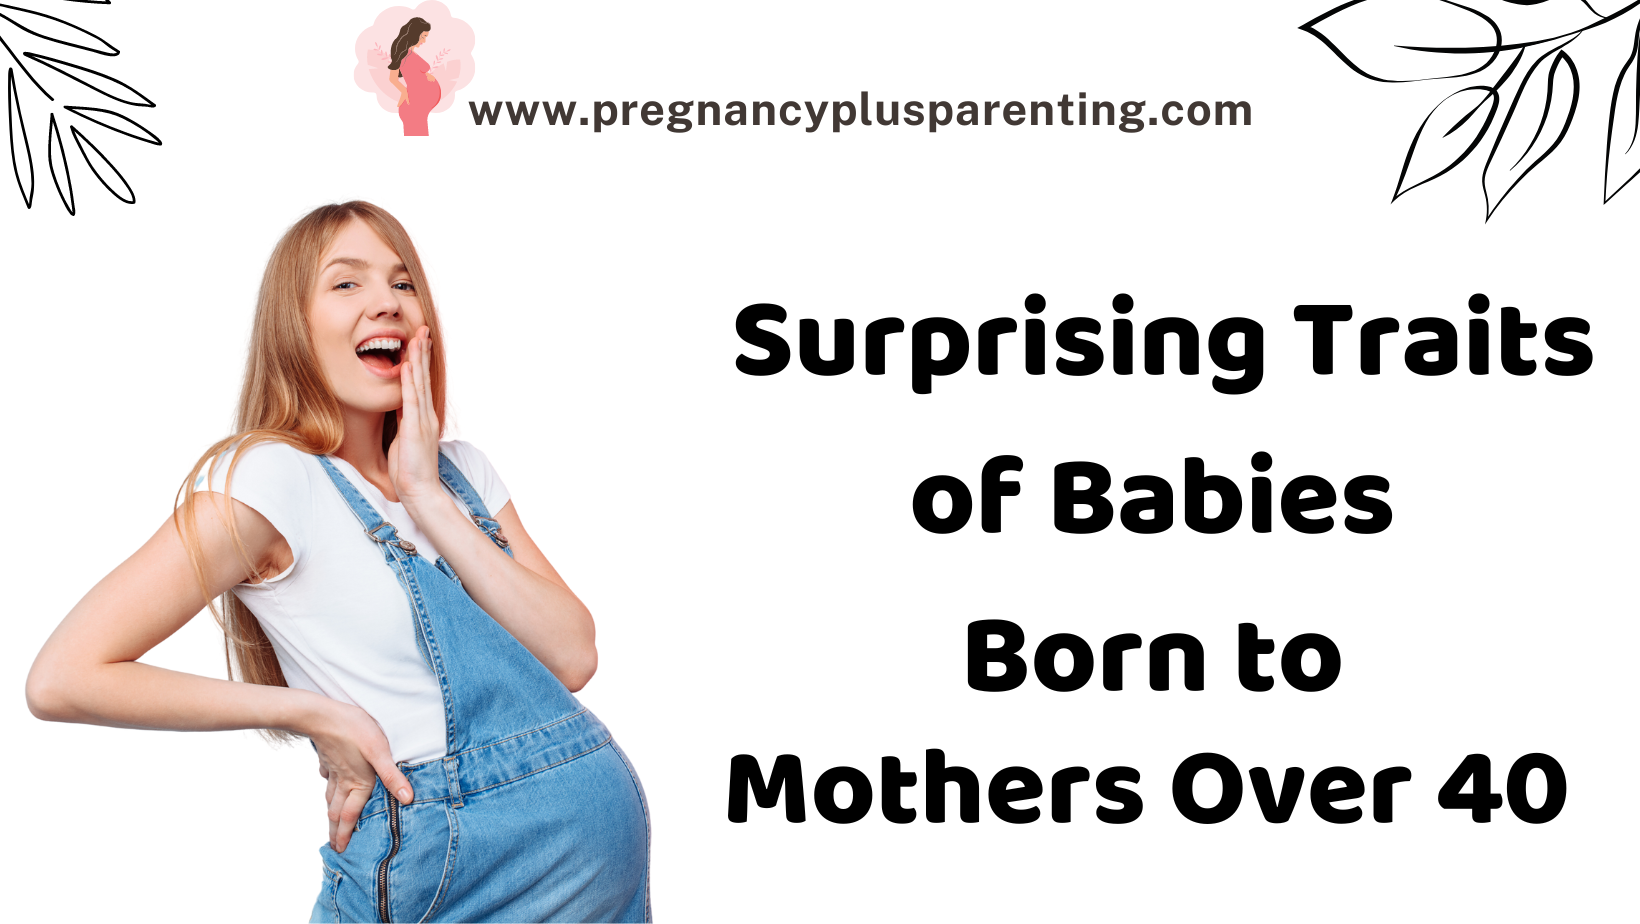 Surprising Traits of Babies Born to Mothers Over 40